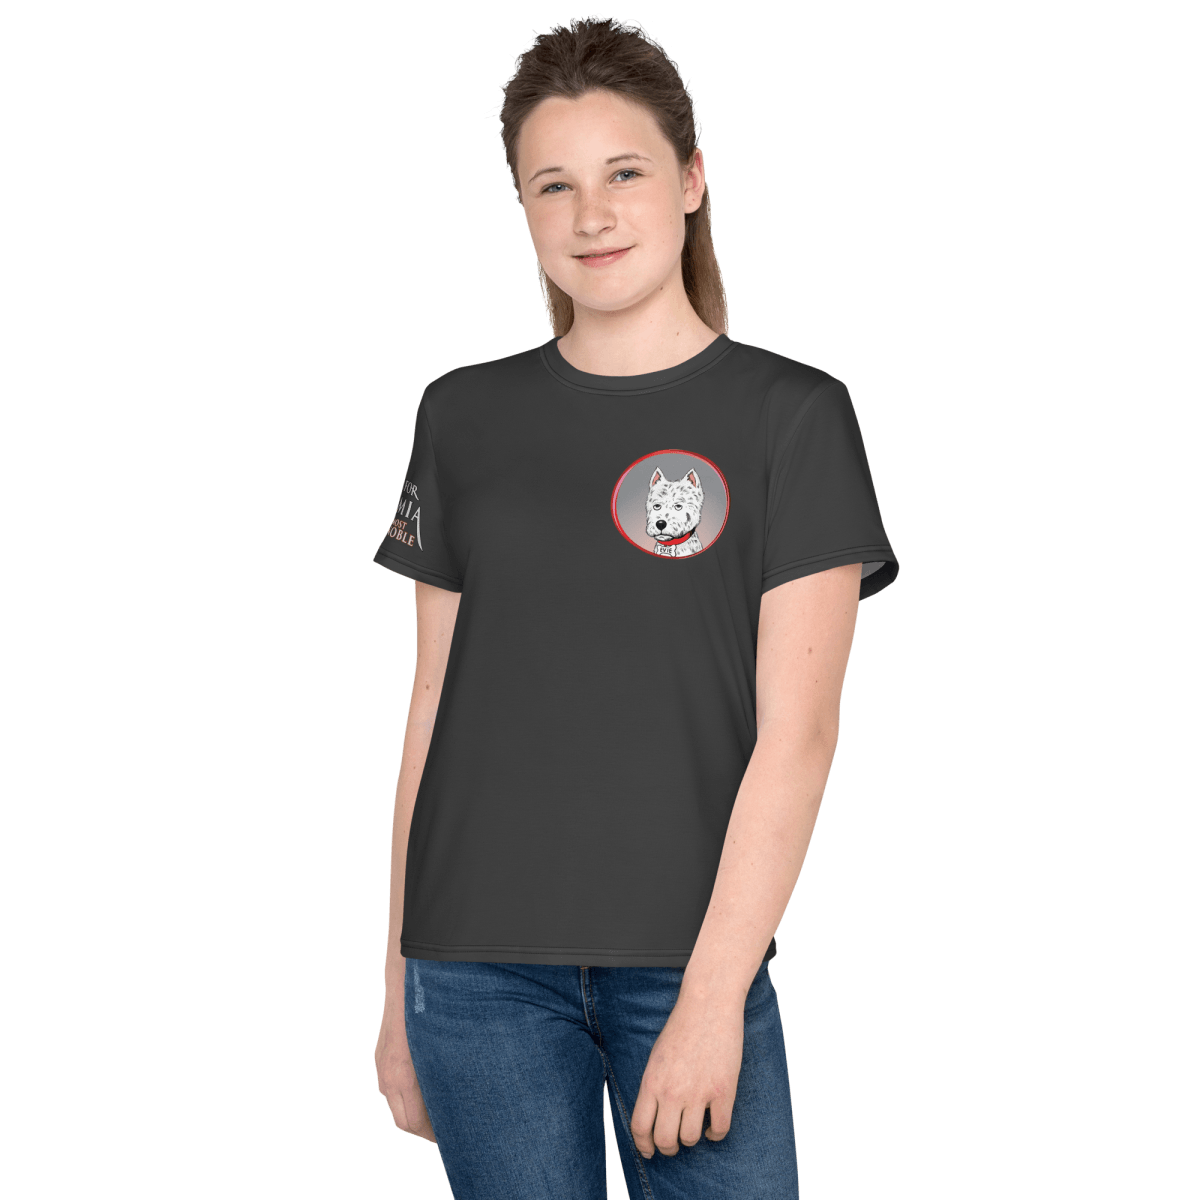 Evie Knows Magic Youth Crew Neck T-shirt - RG Halleck